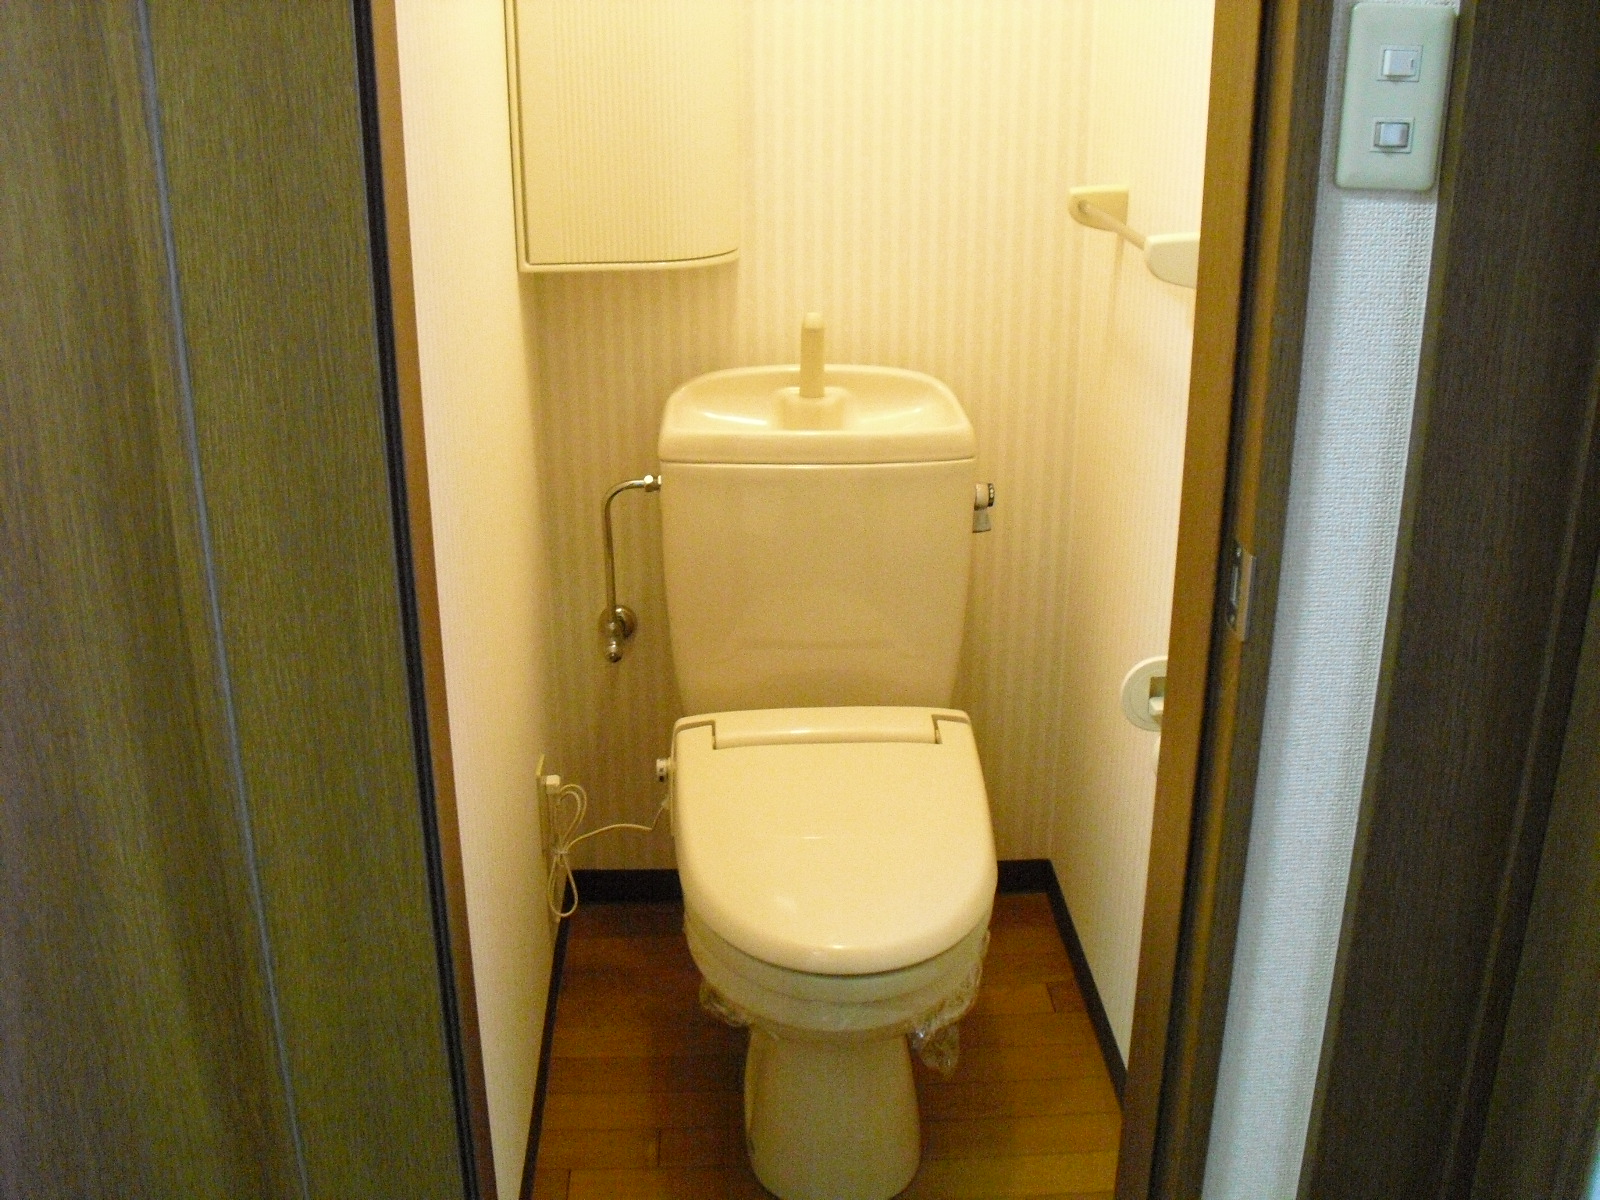 Toilet. It is with heating toilet seat.